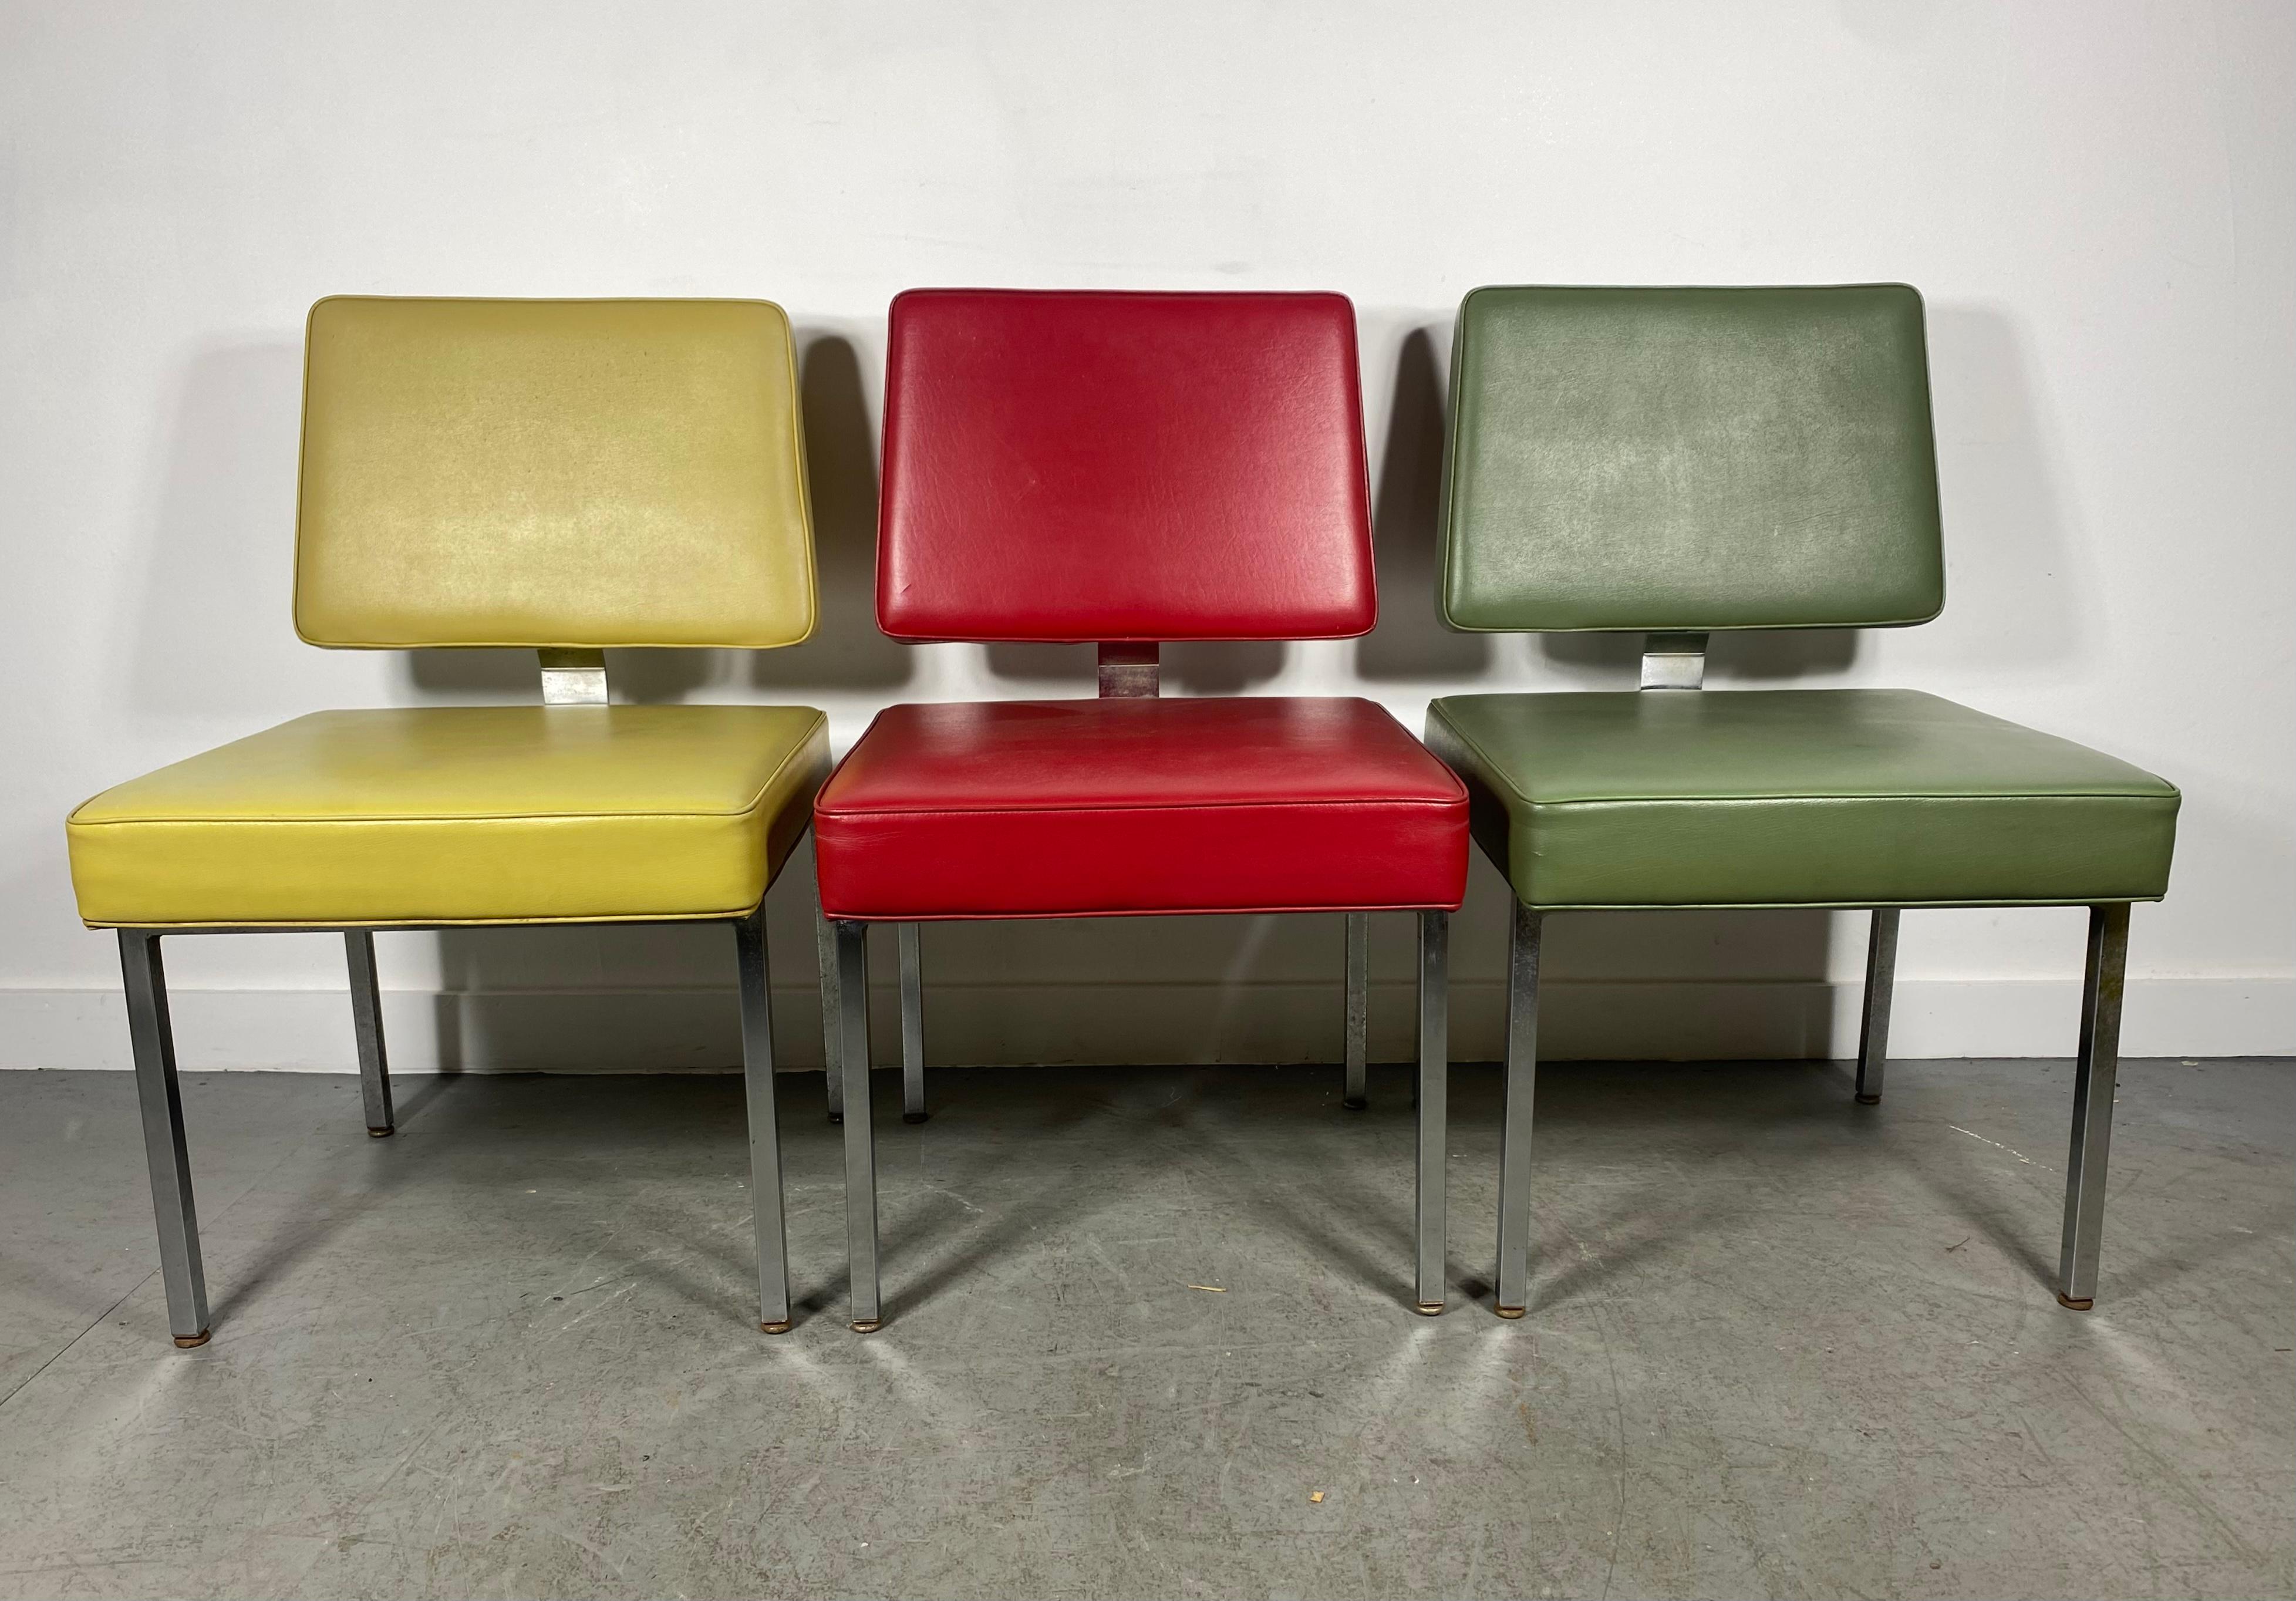 Classic Mid-Century Modern Chrome and Naugahyde Side Chairs in the manner of Florence Knoll, made by SIGNORE INC.Classic style and design, Amazing quality and construction, Retains original upholstery, great colors. Hand delivery avail to New York